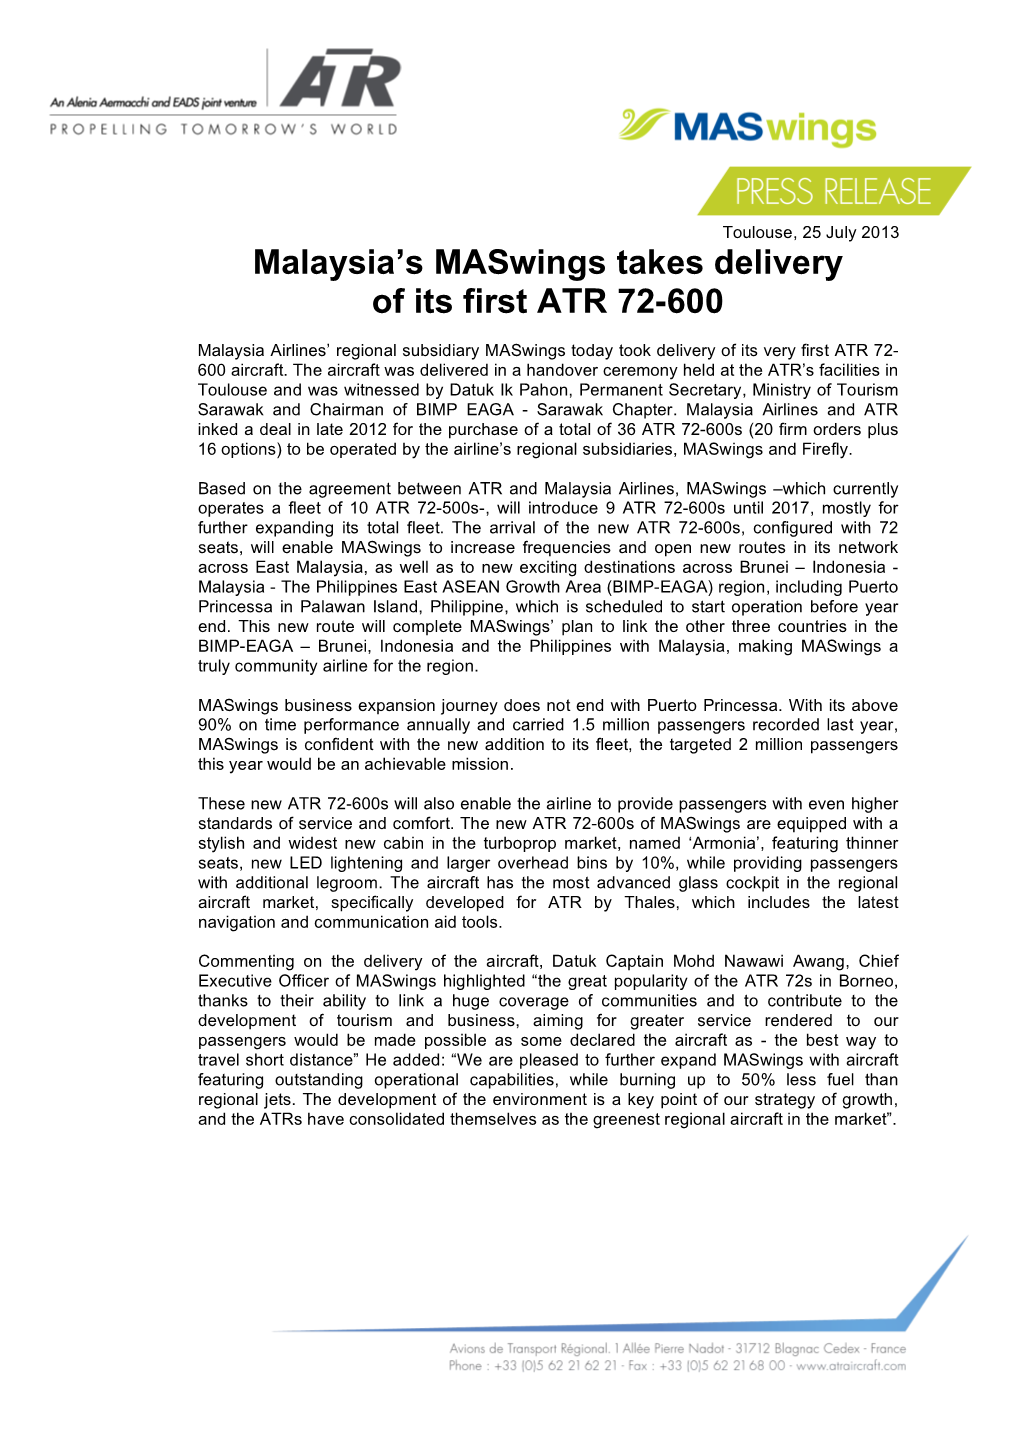 Malaysia's Maswings Takes Delivery of Its First ATR 72-600